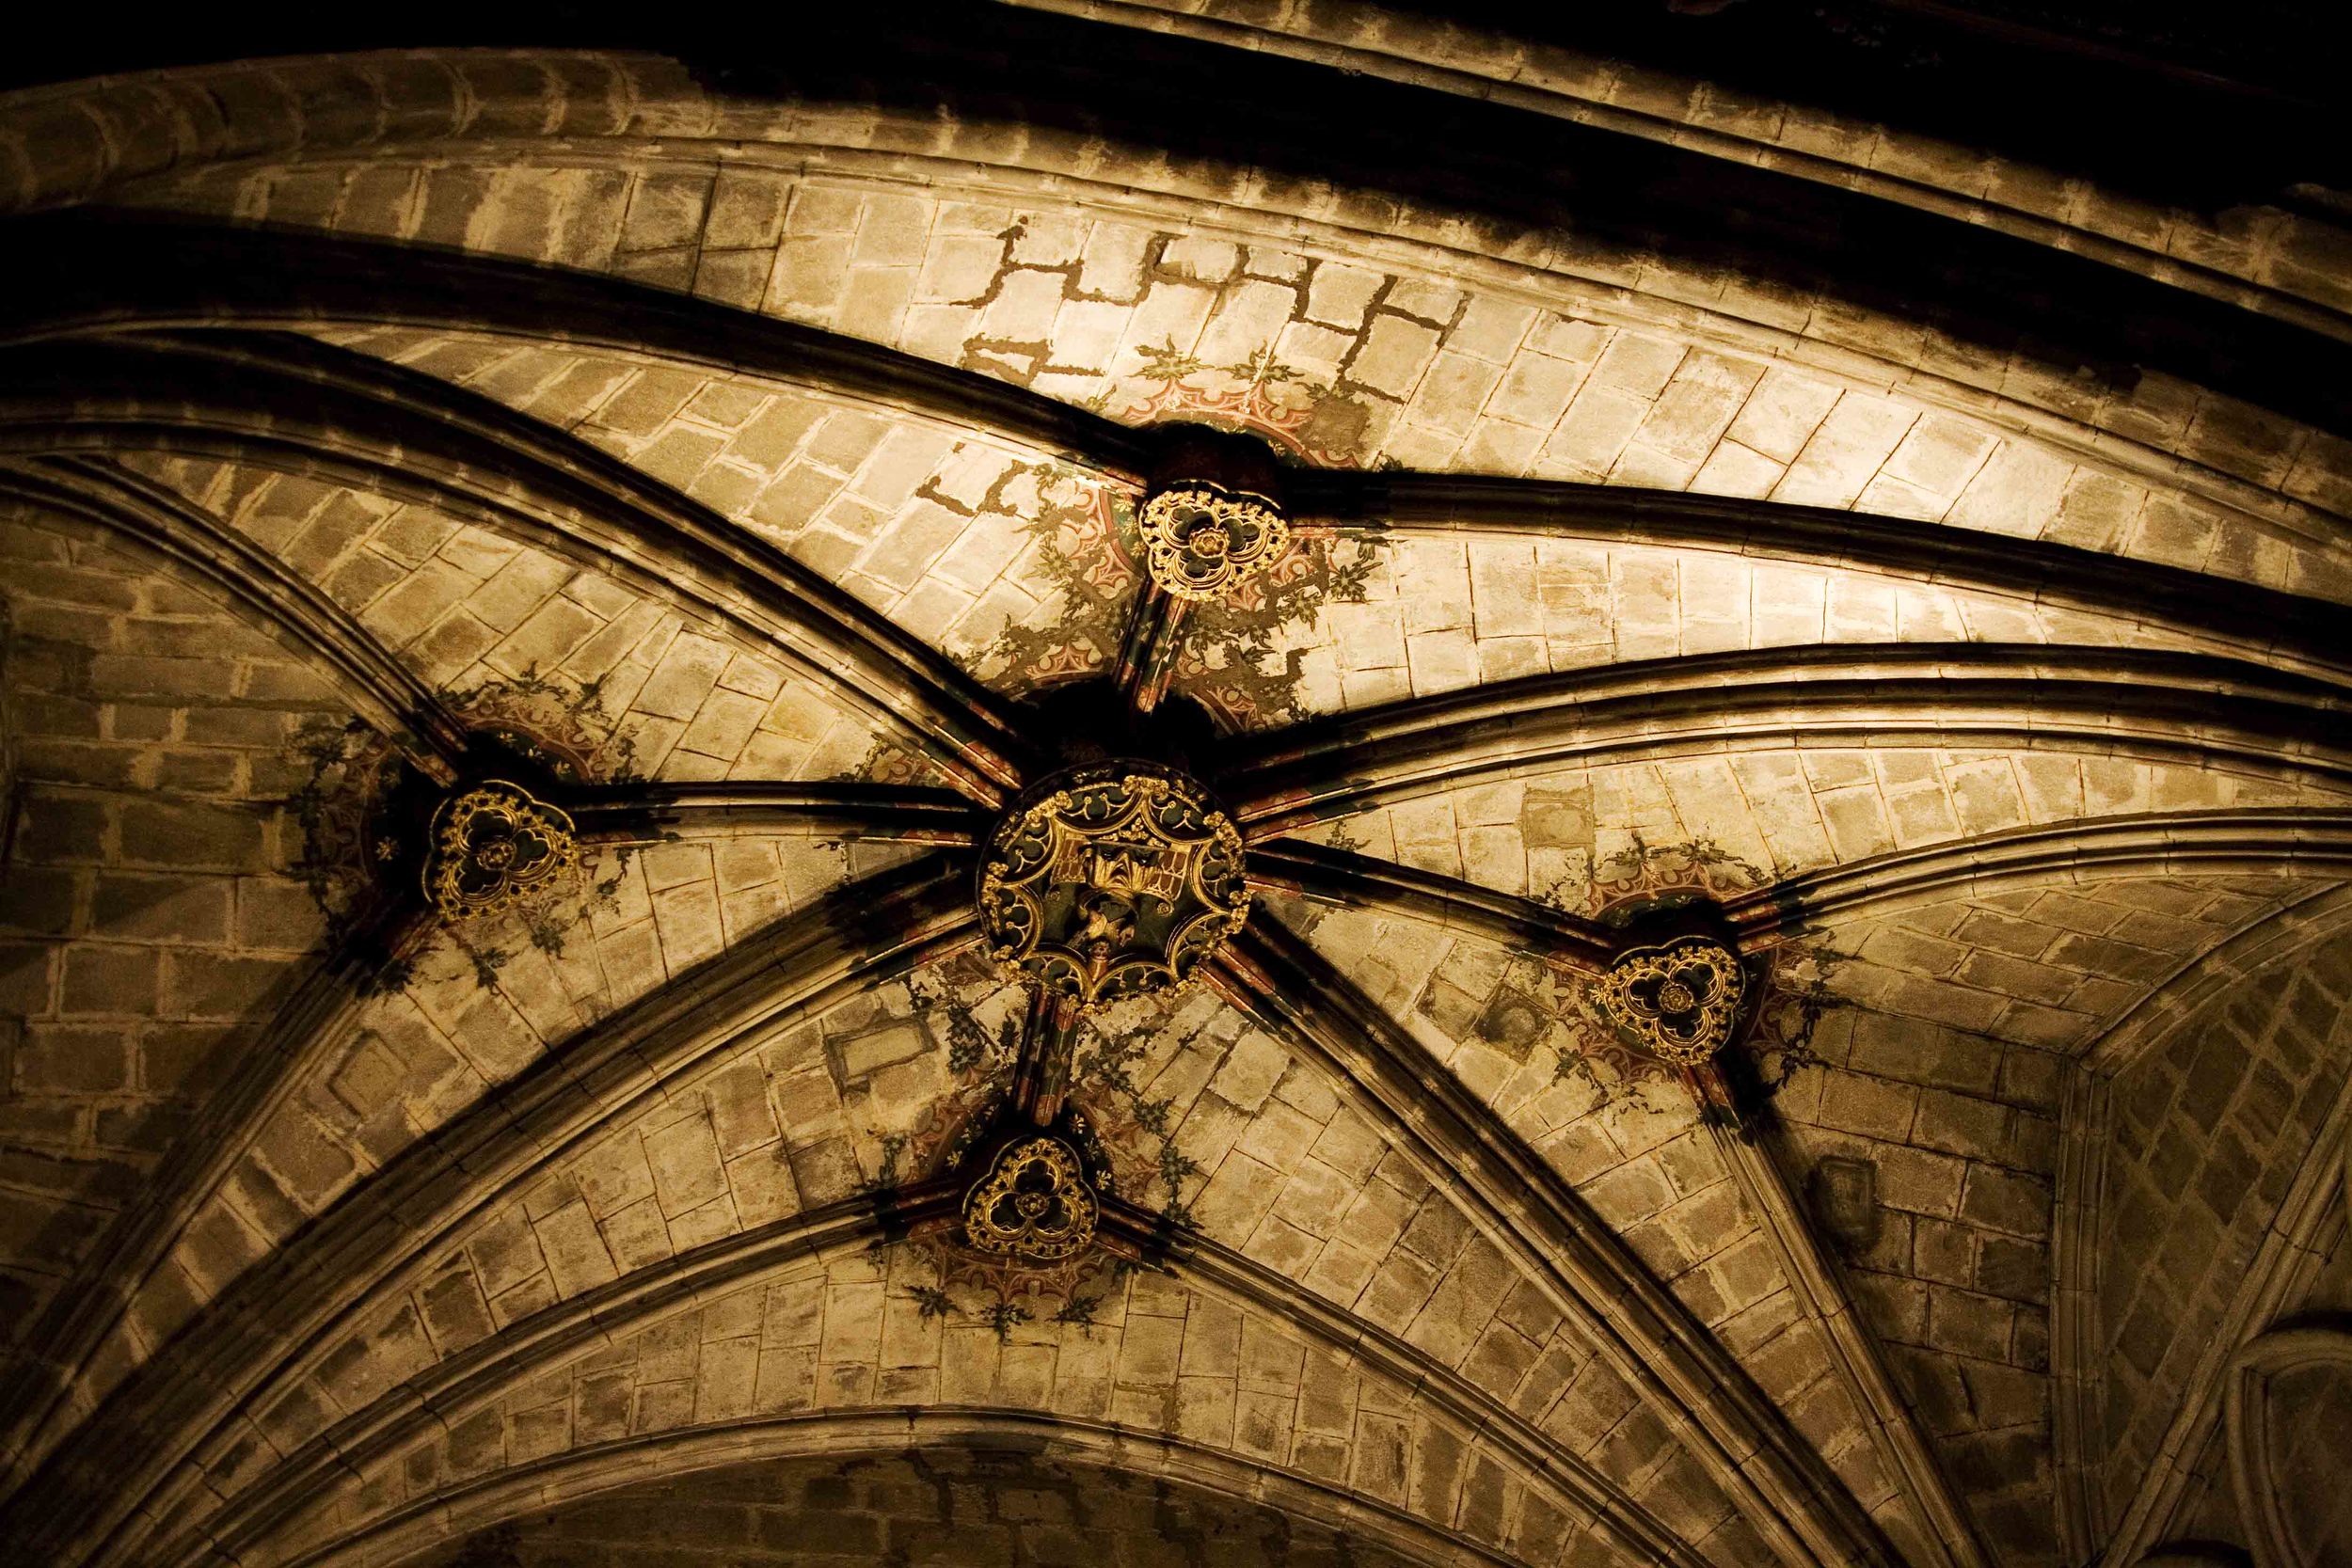 A-Cathedral Ceiling 4A.jpg